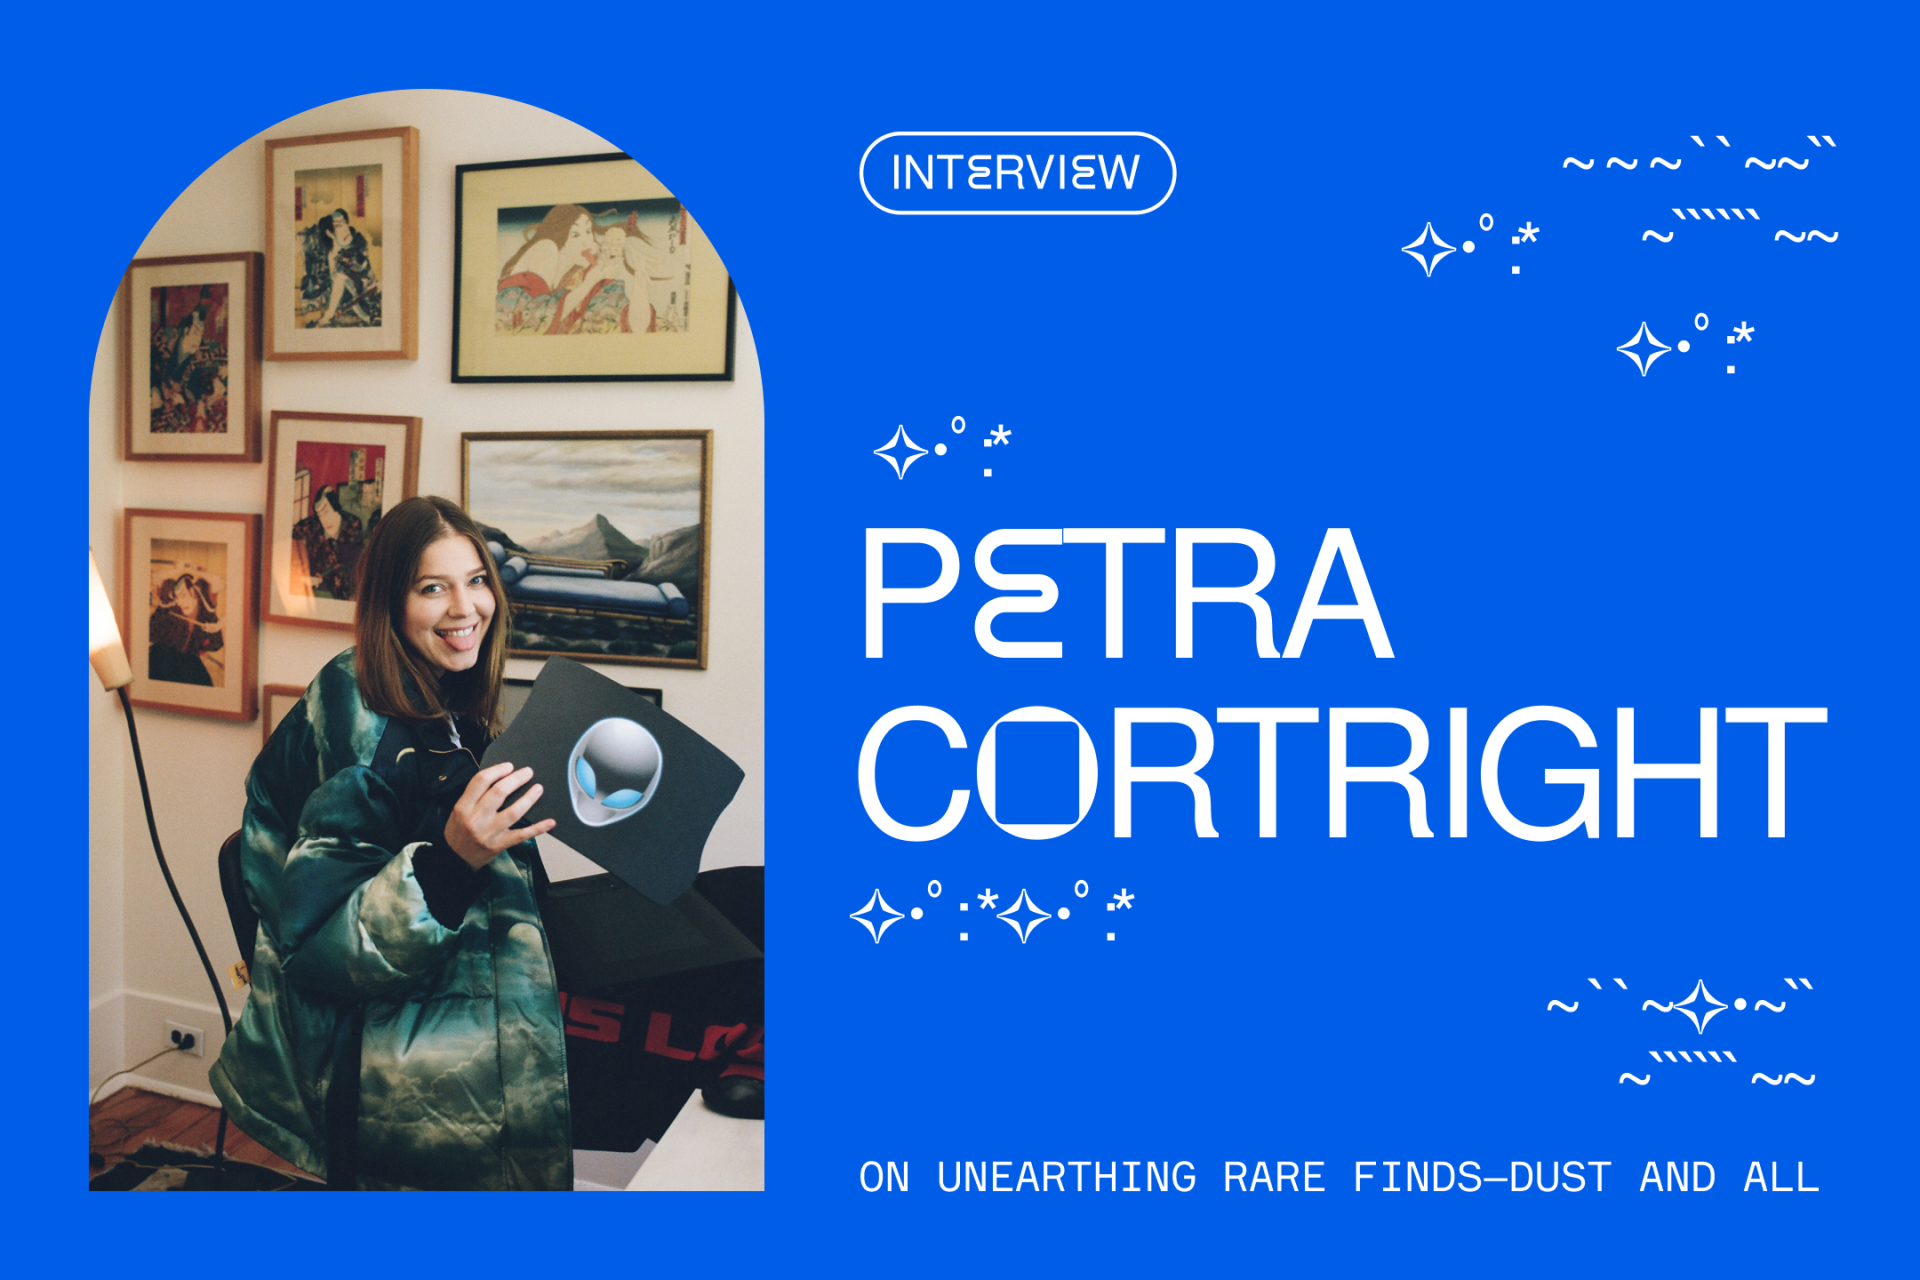 Petra Cortright on unearthing rare finds, dust and all.